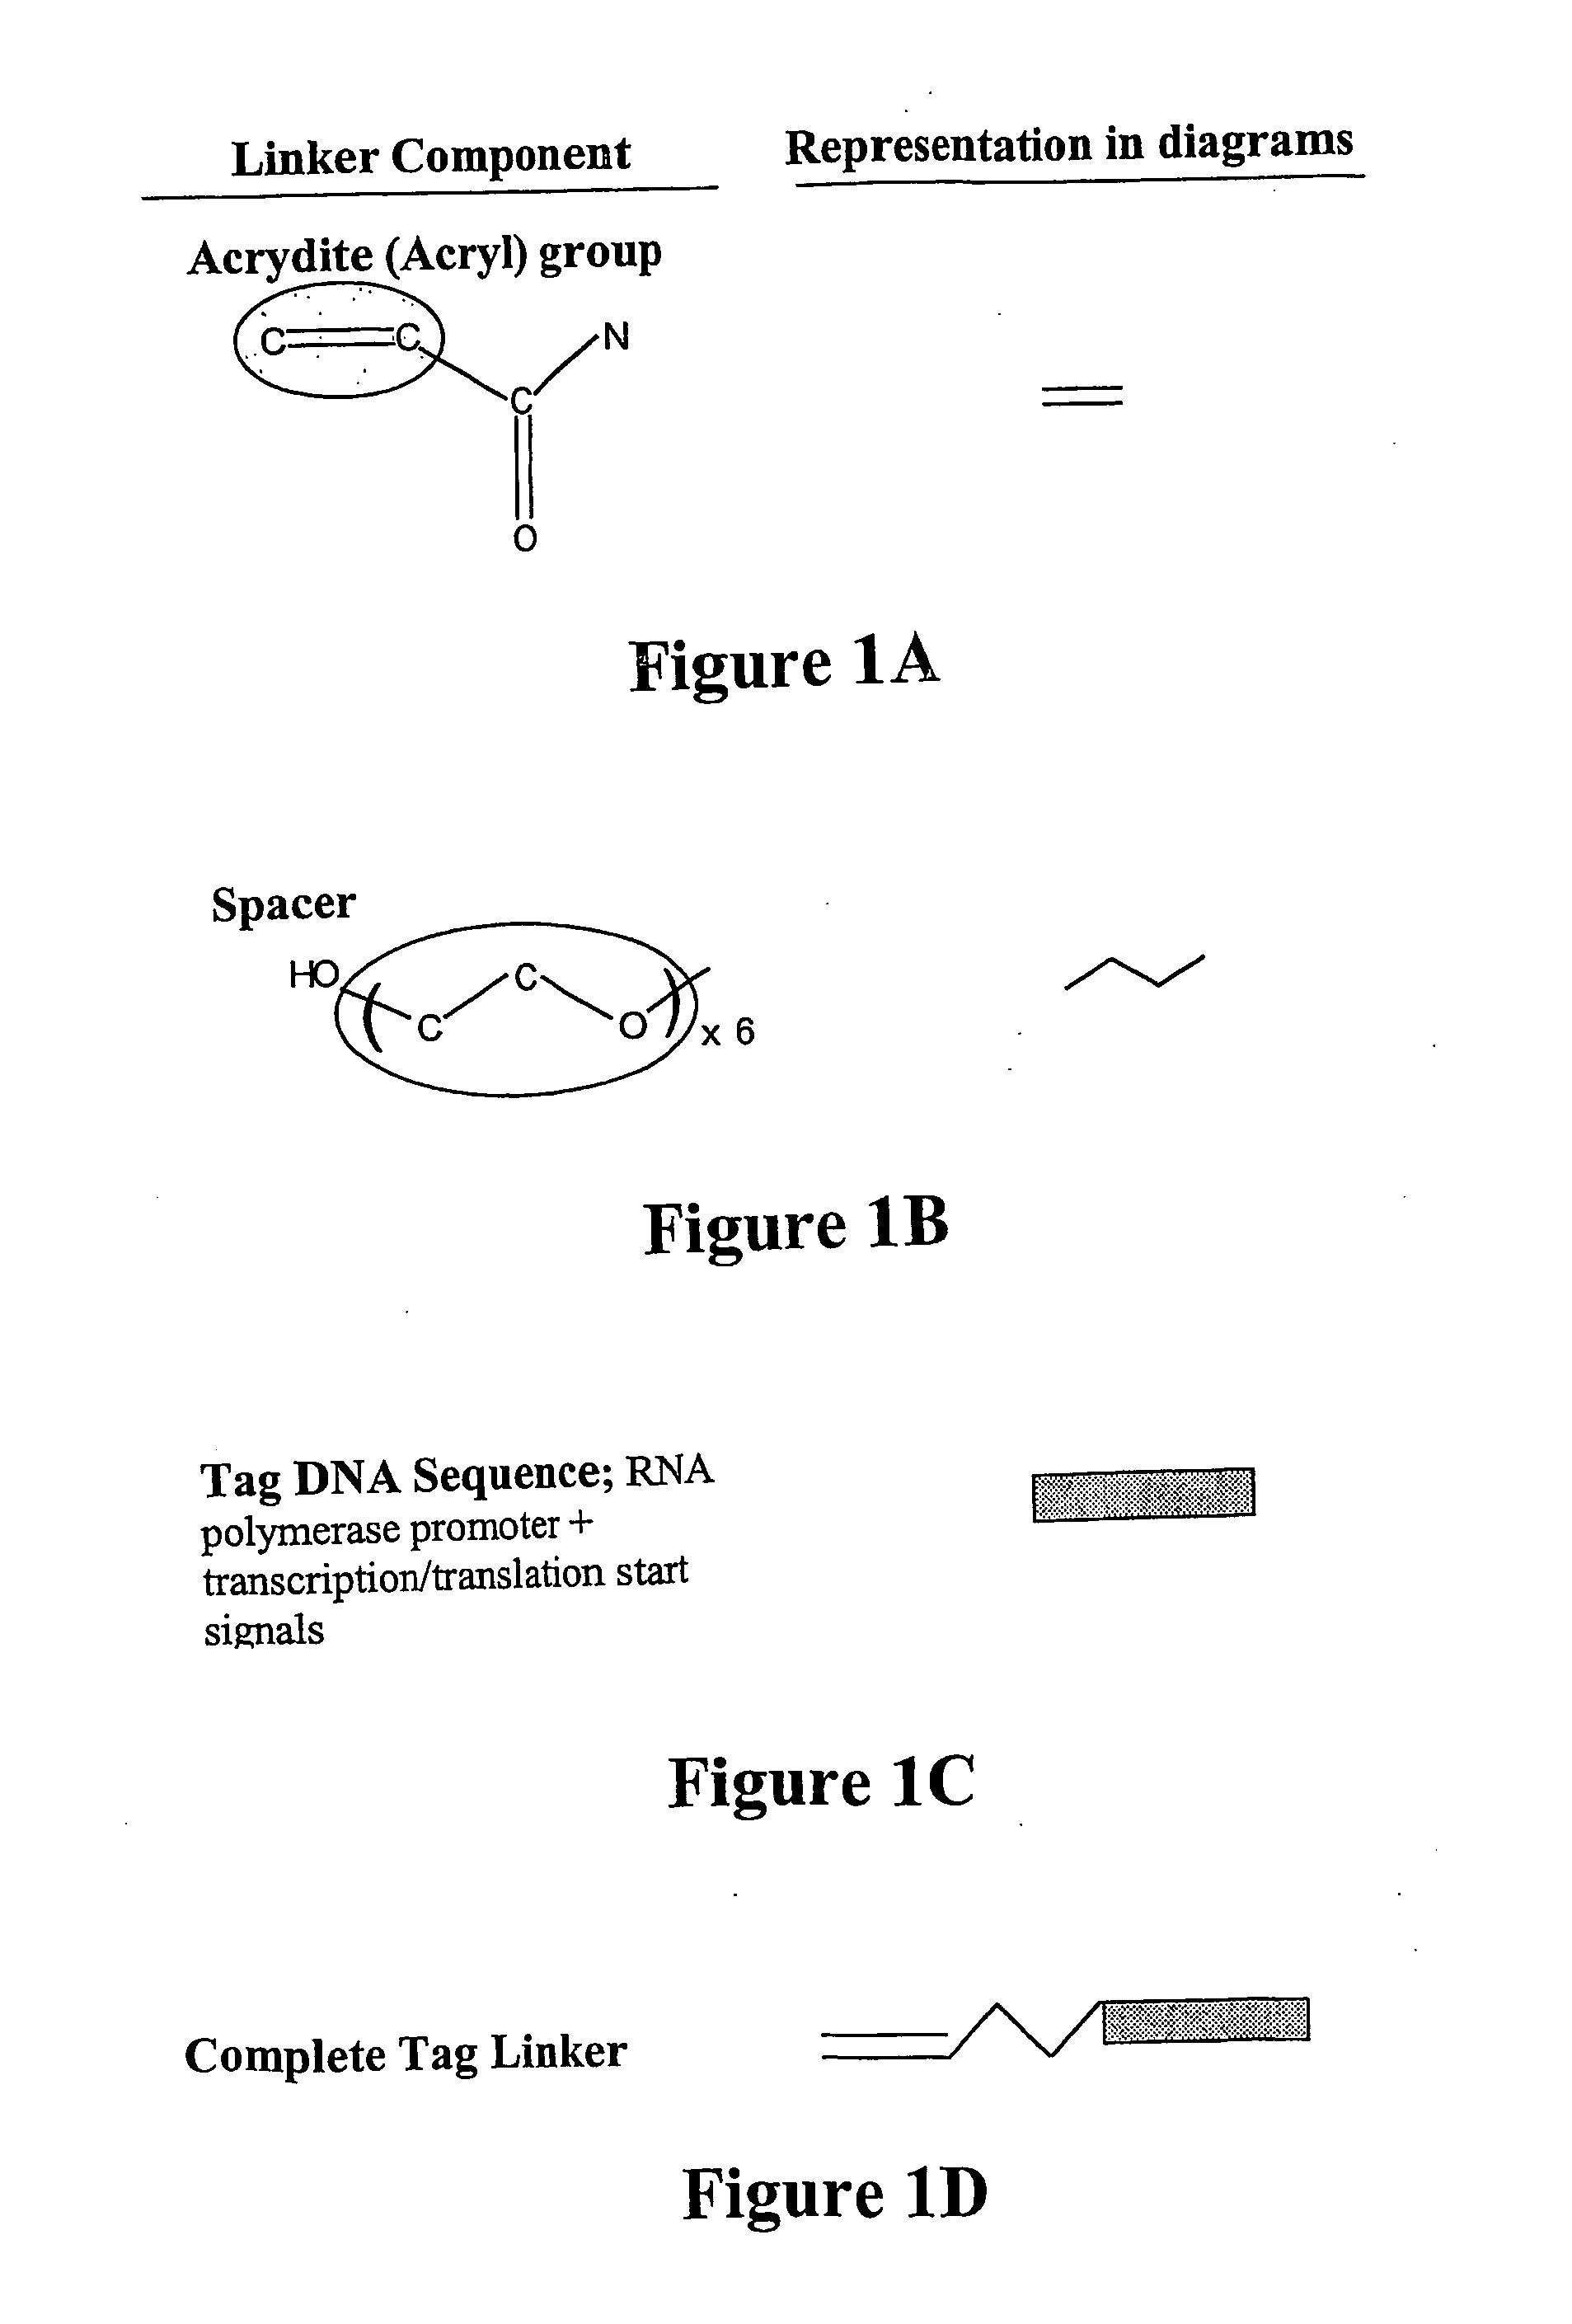 Nucleic acid anchoring system comprising covalent linkage of an oligonucleotide to a solid support